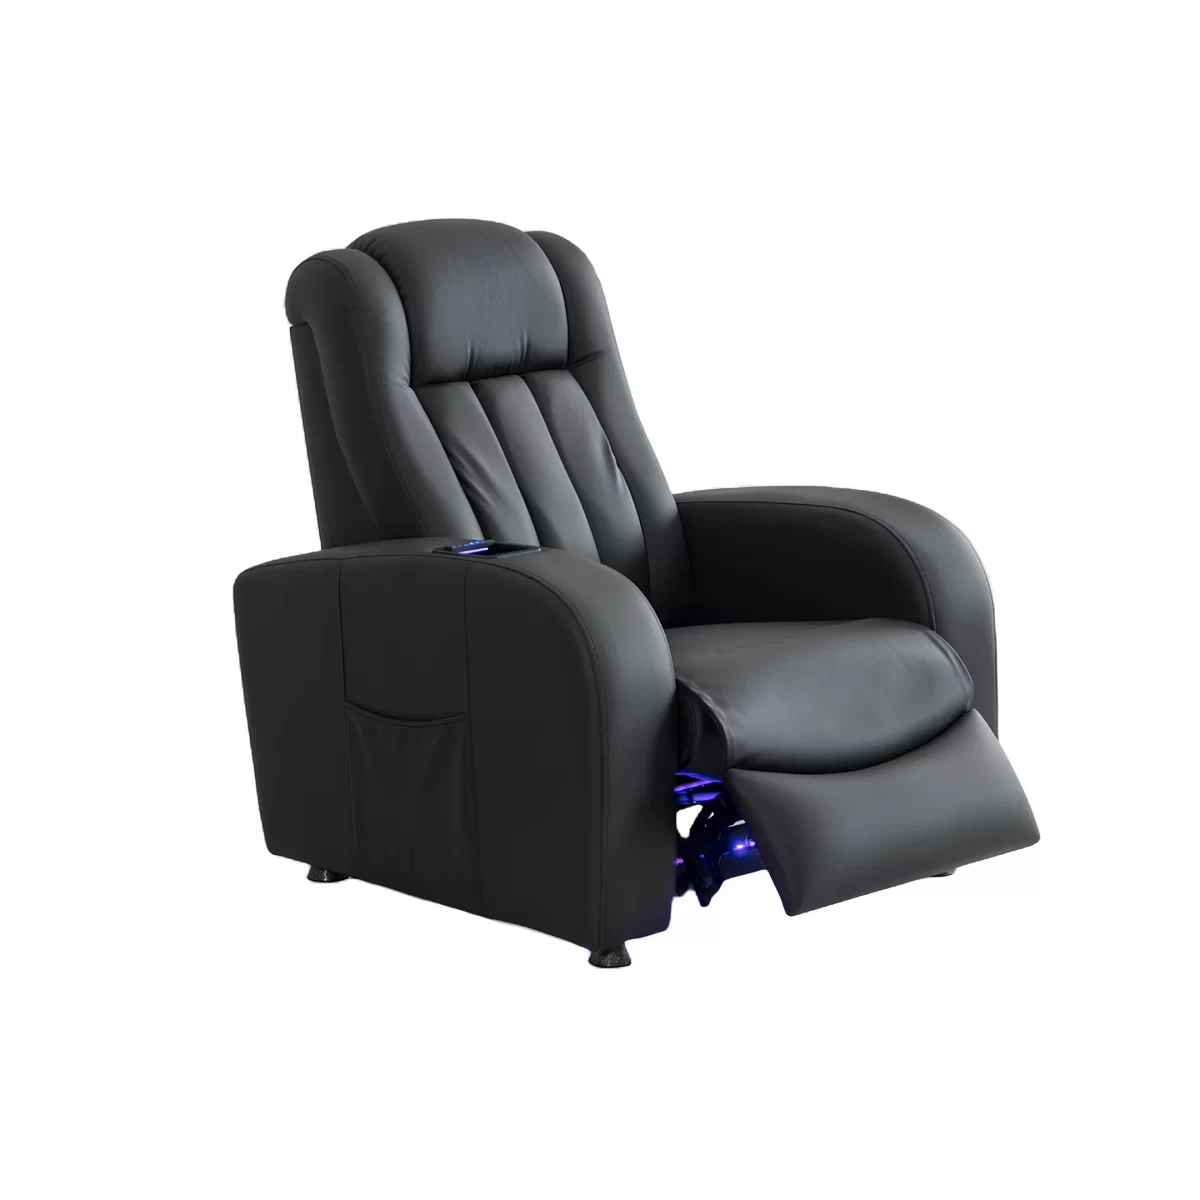 siesta reclining sofa vip theater seating led lights usb port cooler cup holder 6